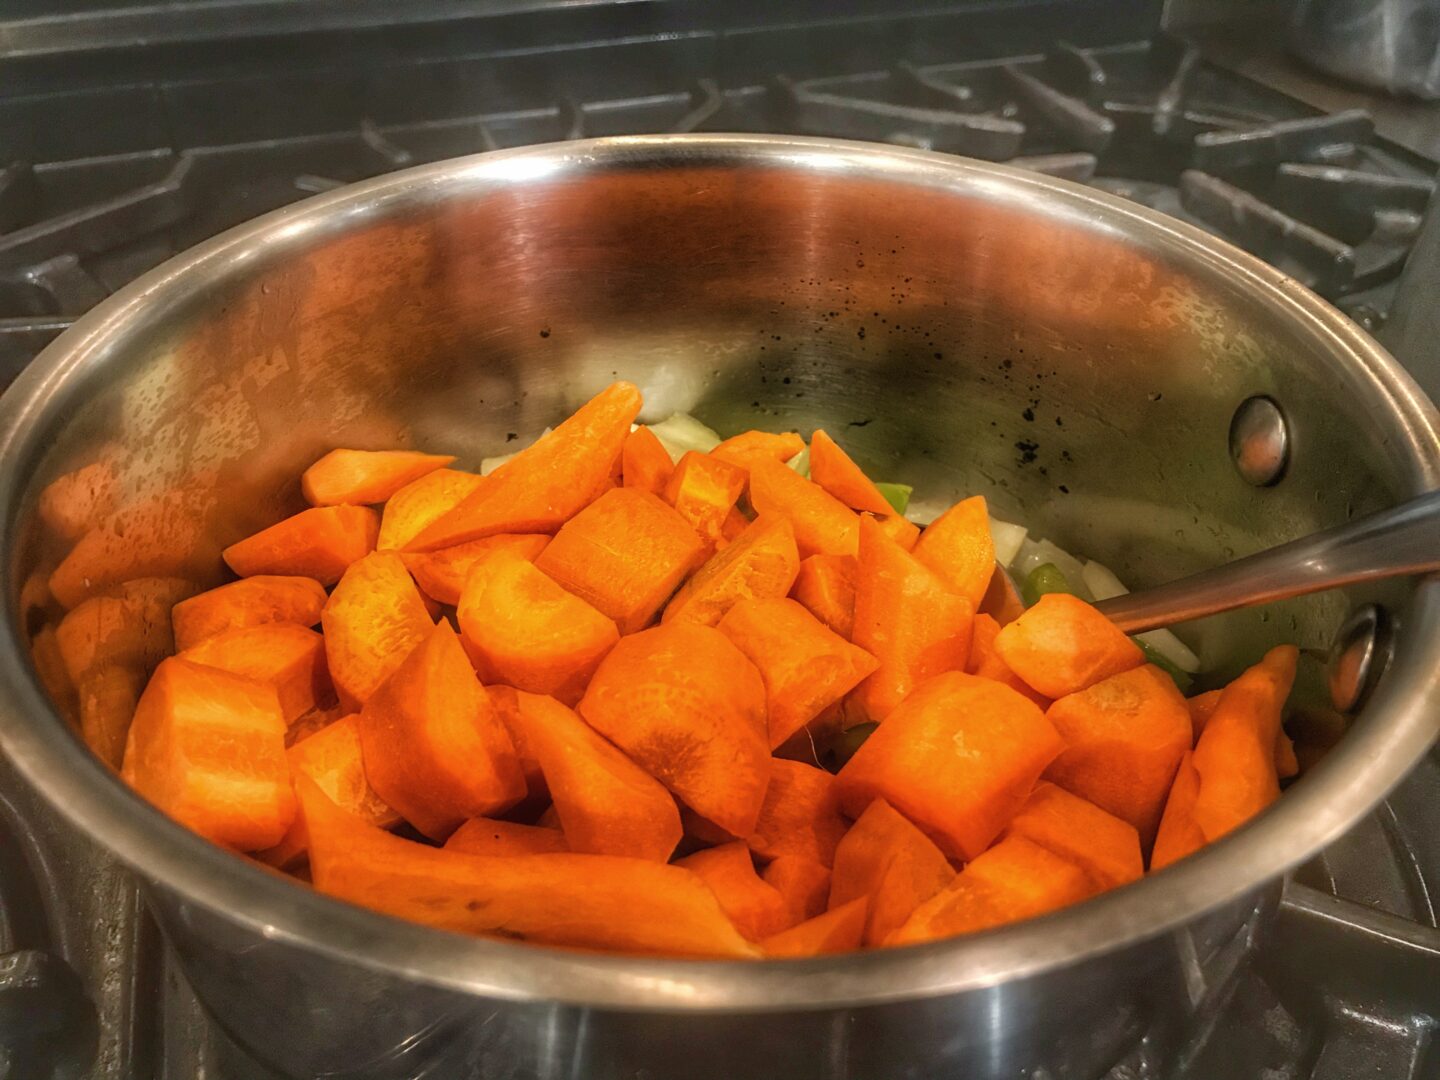 A pot filled with carrots and onions on a stove.